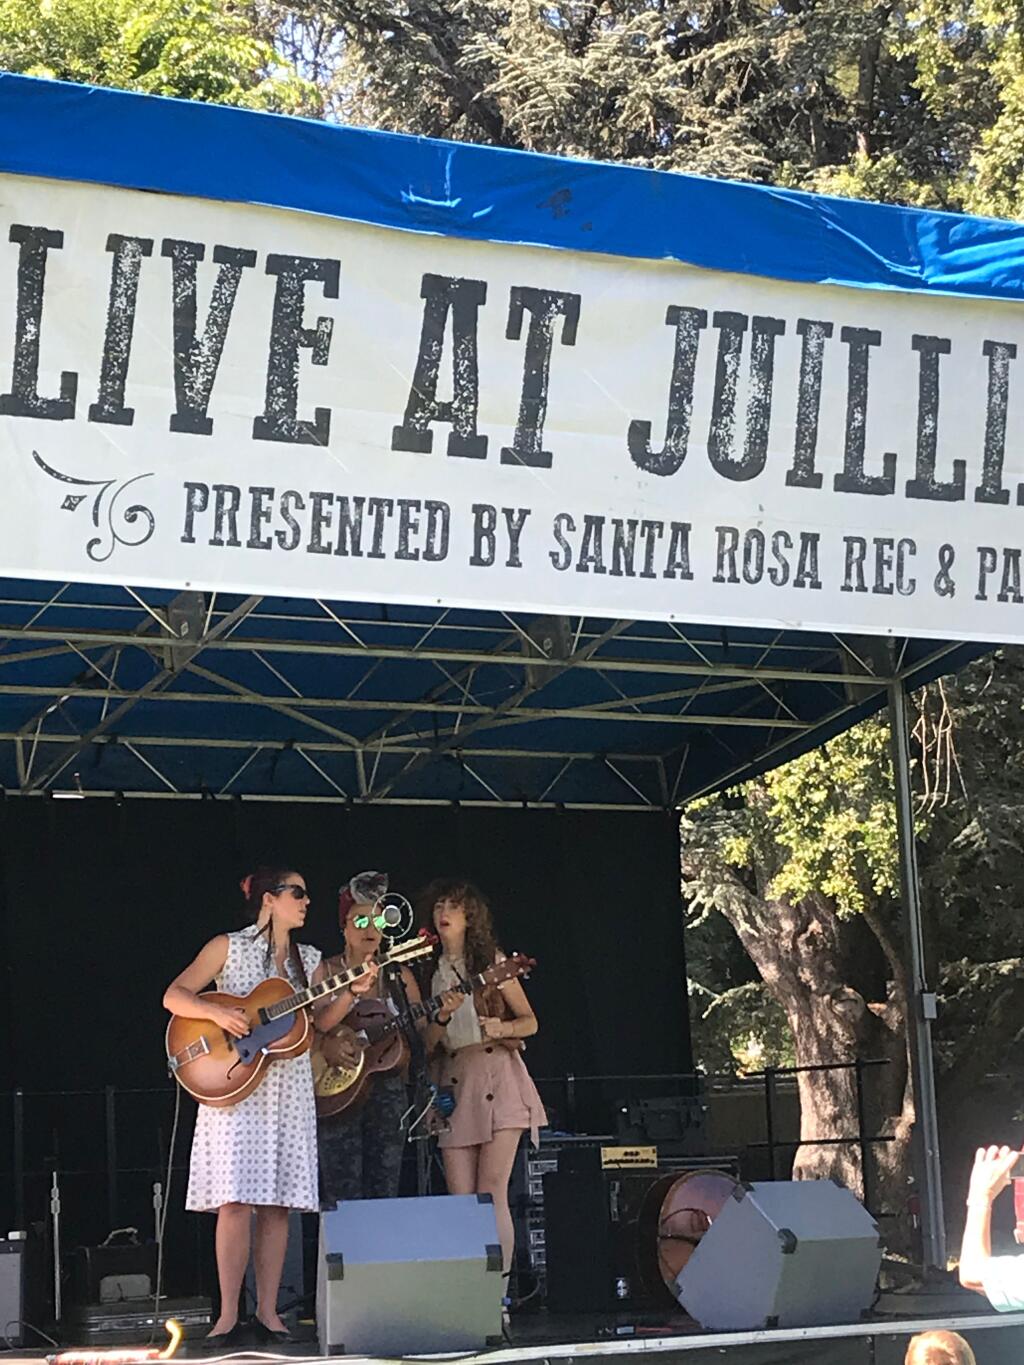 The Rainbow Girls perform at the “Live at Juilliard” concert series in 2018 at Santa Rosa’s Juilliard Park. The city is redirecting funds it had budgeted for the concert series to be used instead for grants to help local musicians. (City of Santa Rosa.)